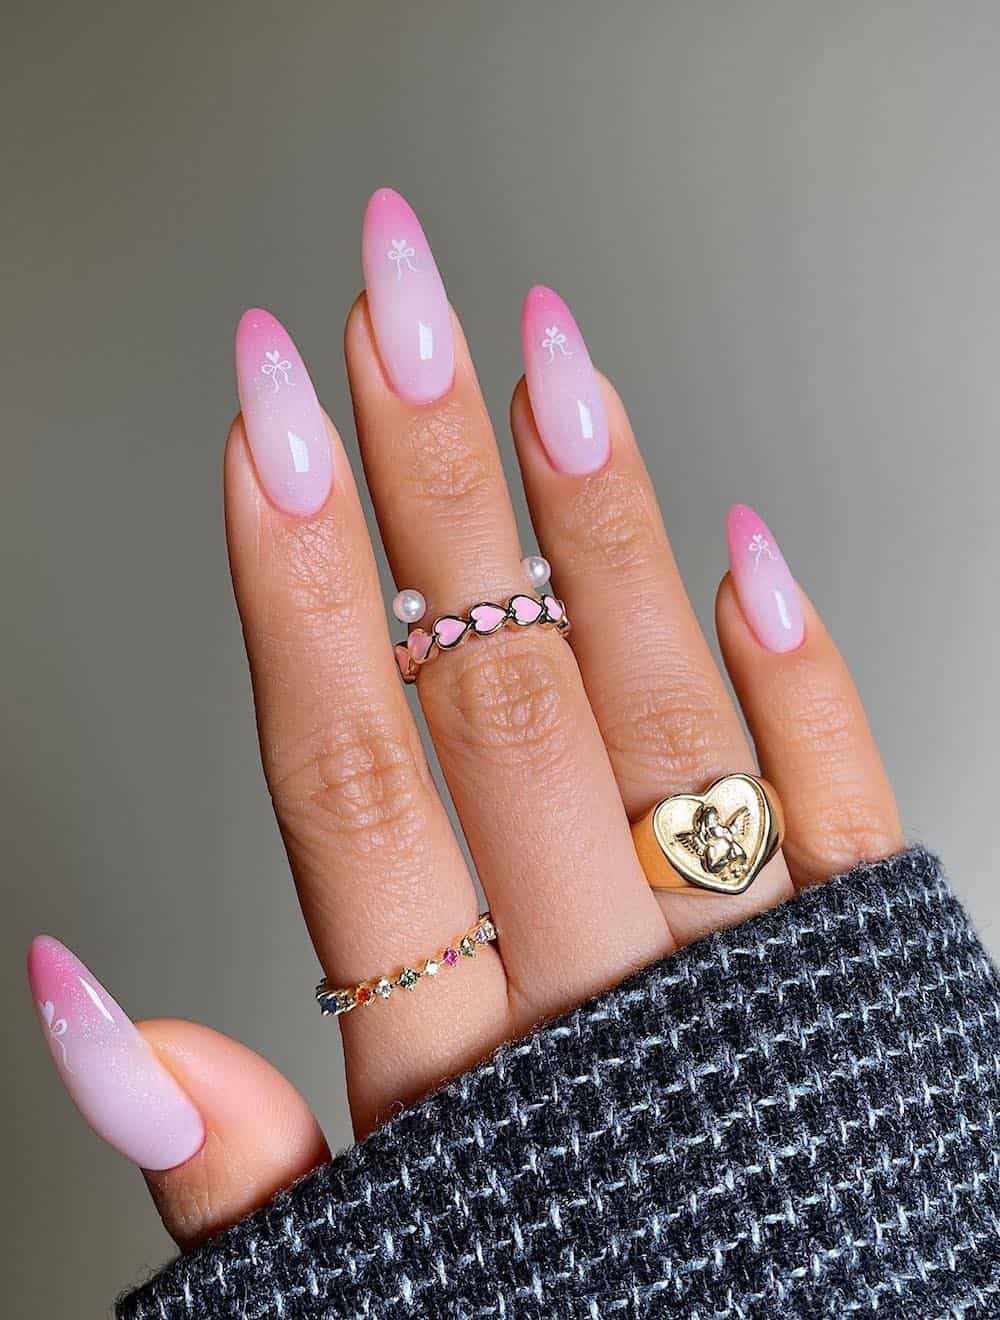 A hand with long almond nails painted a shimmering white with blended pink tips, white bow art, and white heart accents